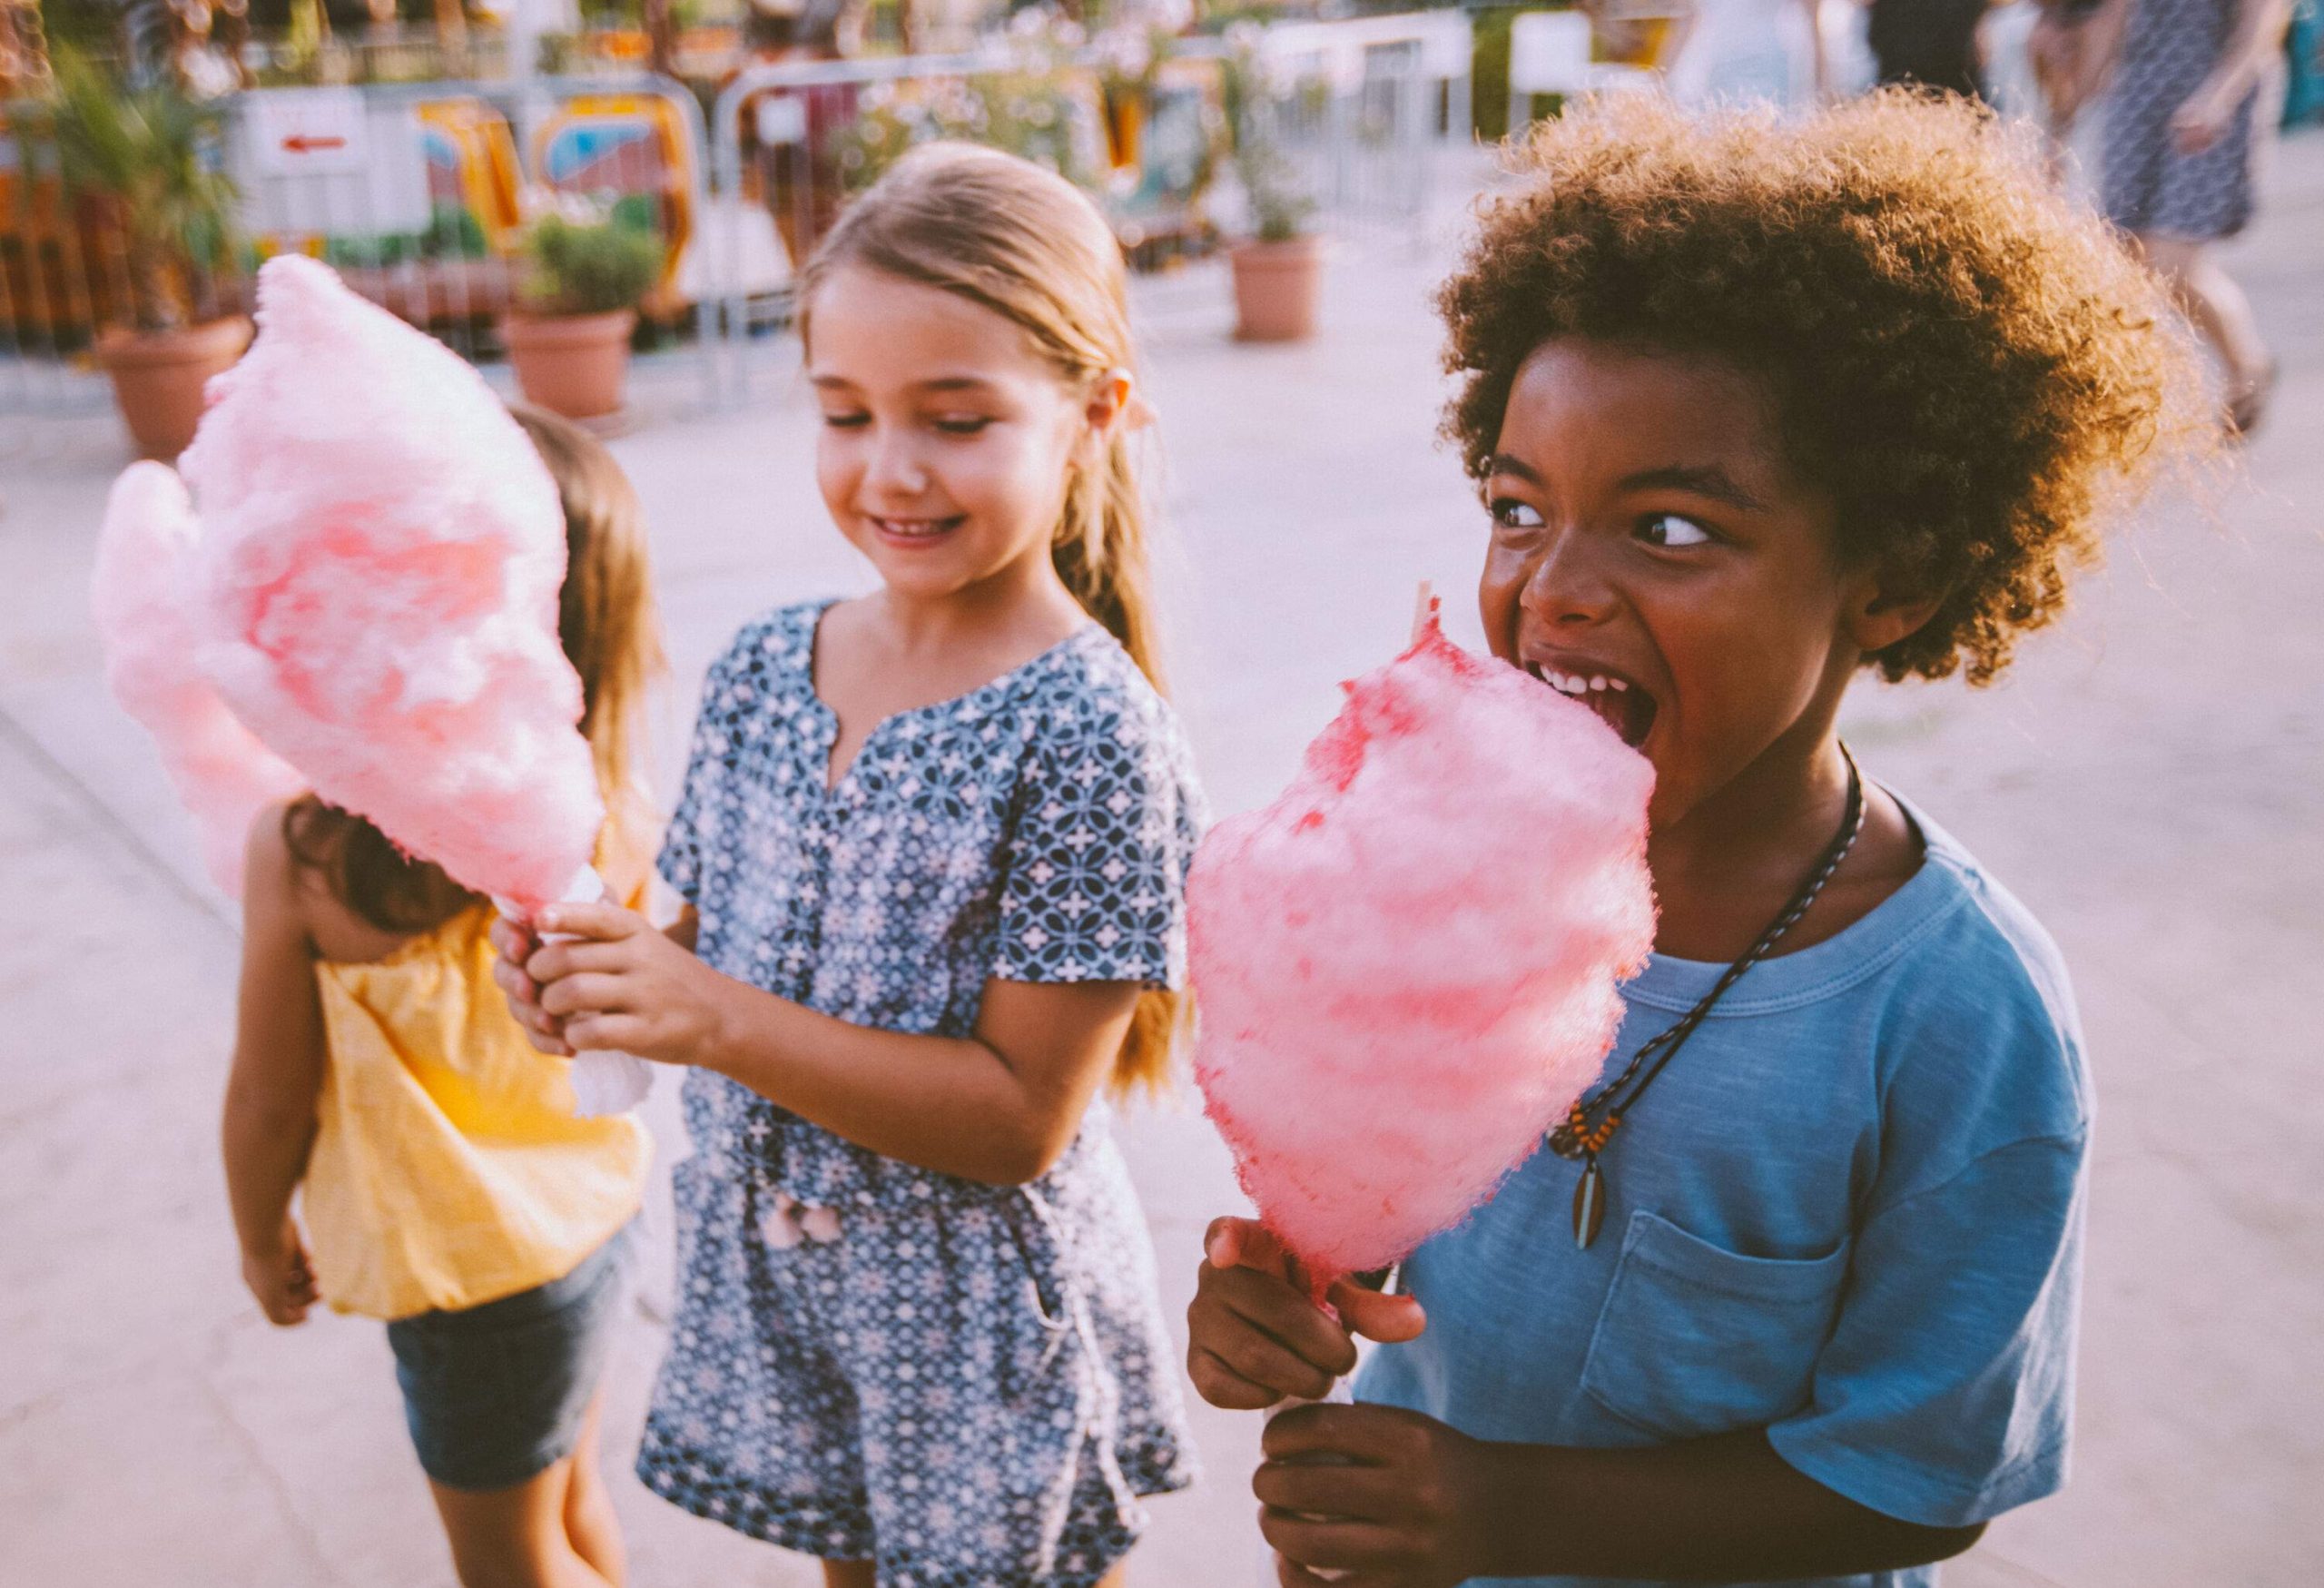 Delighted children with beaming smiles tuck into fluffy pink cotton candy, their faces lighting up with joy as they relish the sweet treat.